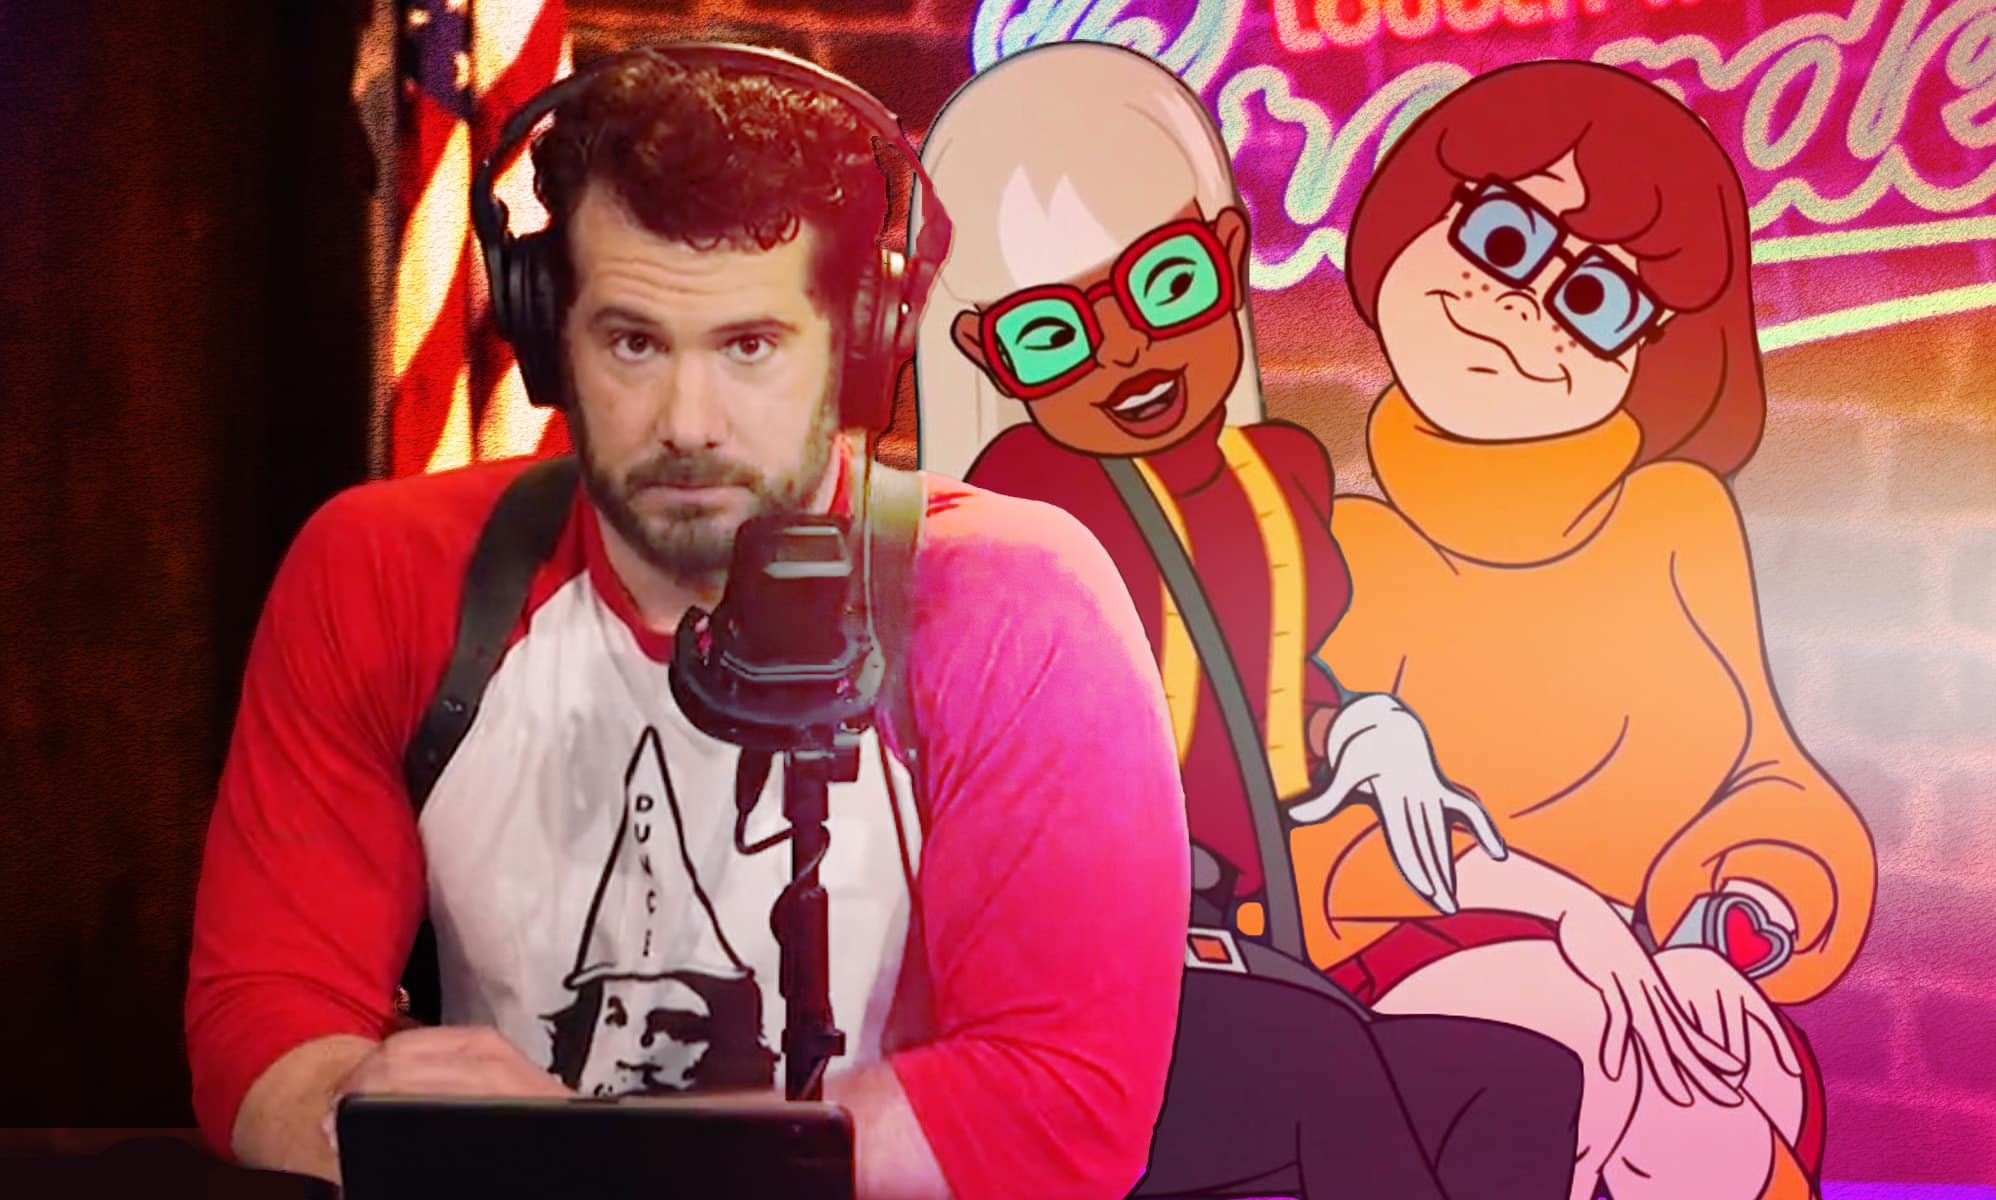 Scooby Doo's Velma Was Meant to Be Explicitly Gay - InsideHook